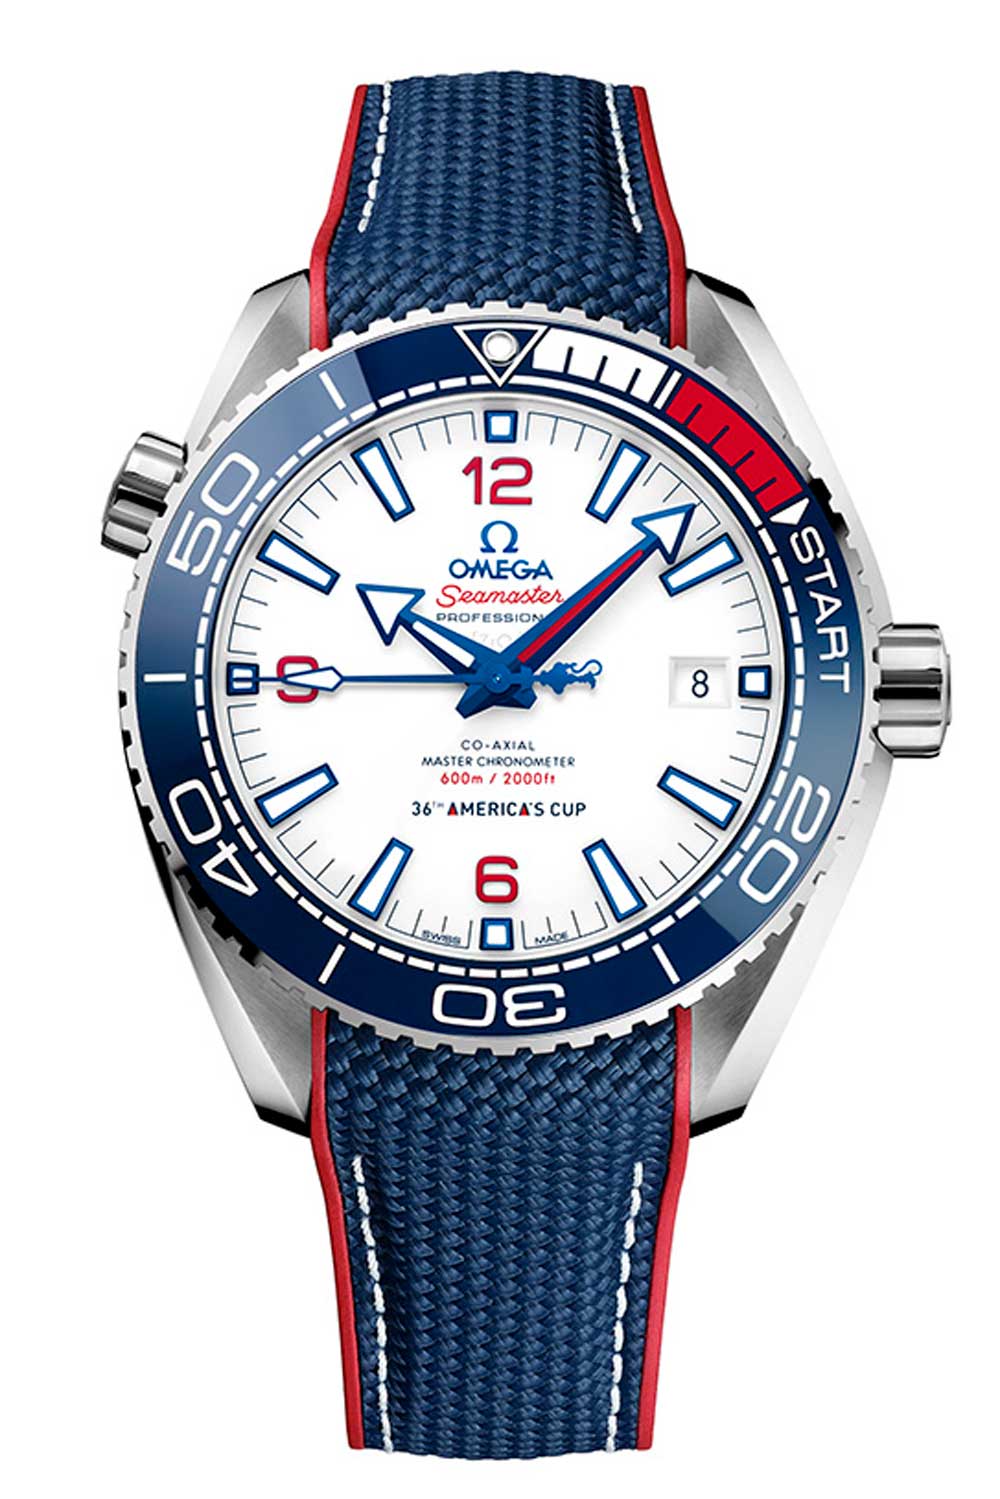 Omega Seamaster Planet Ocean 600M 36th America’s Cup Limited Edition